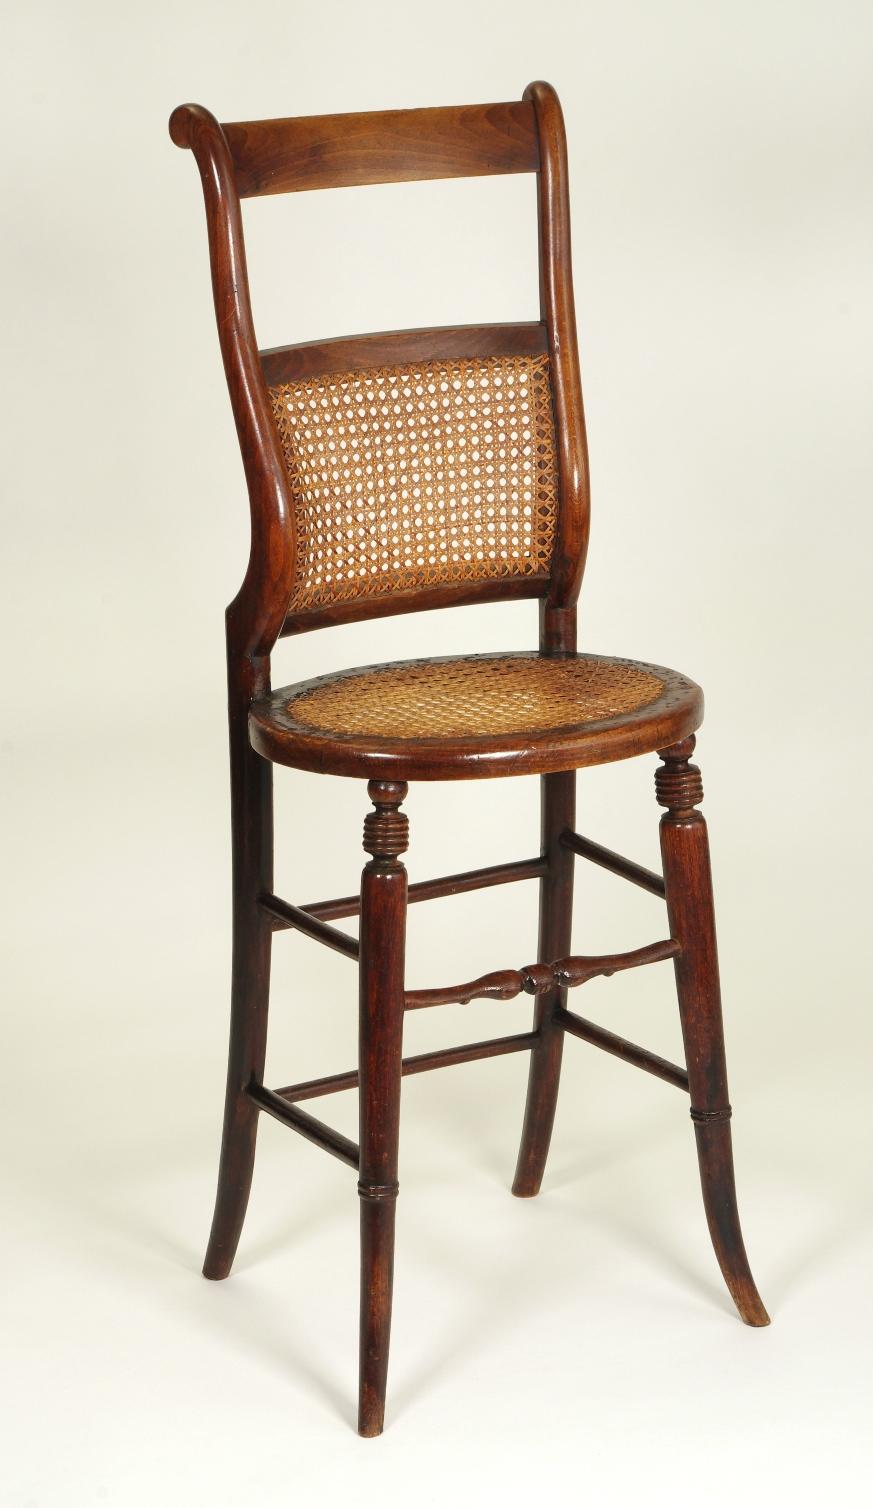 Regency beech child's correction chair, the caned seat and back raised on tall sabre legs joined by numerous stretchers.

The original time-out chair, chairs of this type are known by many names: discipline chairs, punishment chairs and correction